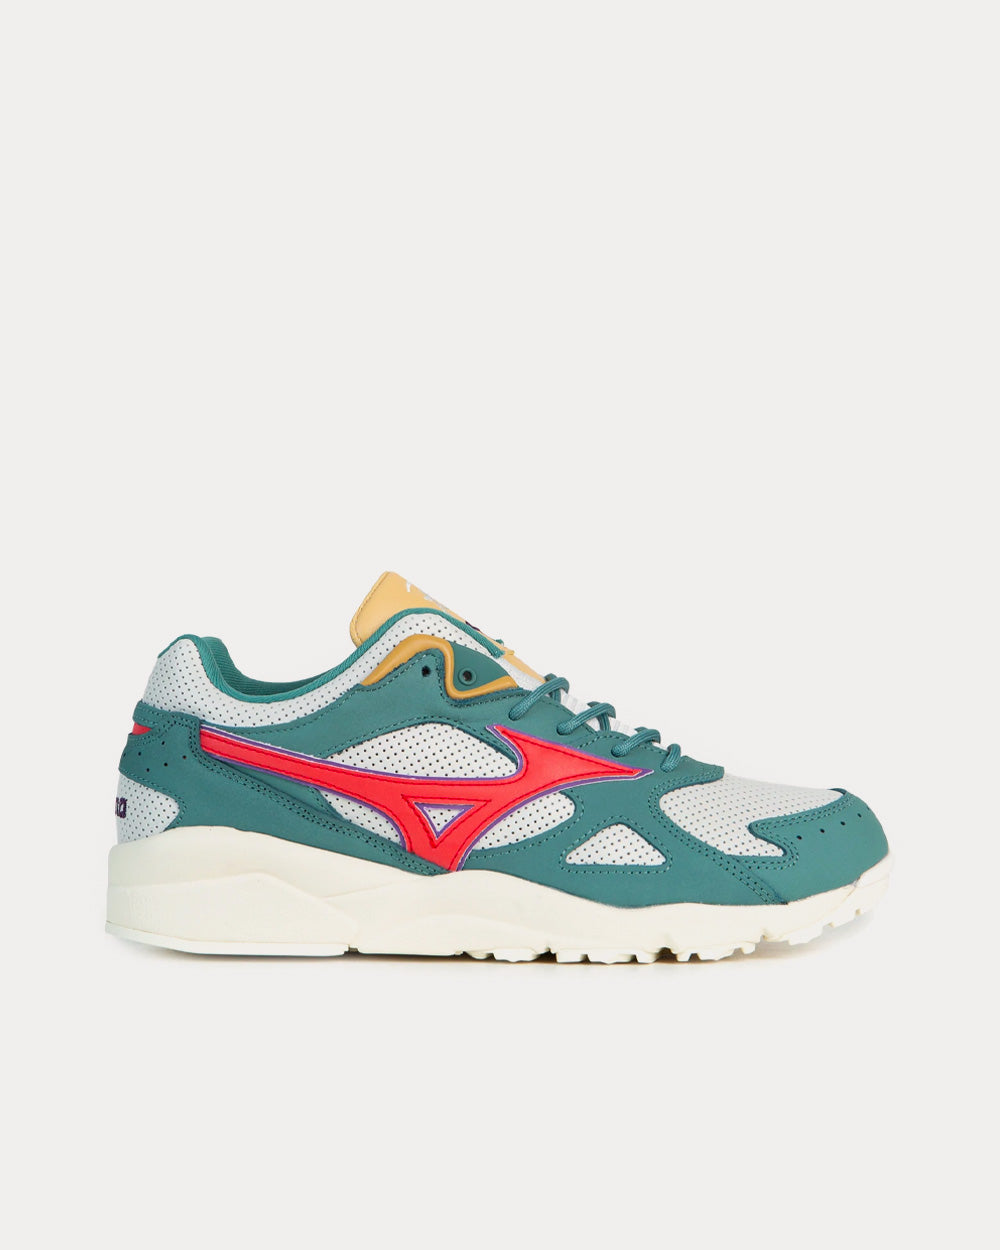 x Patta Sky Medal Ivory / Red / Green Low Top Sneakers